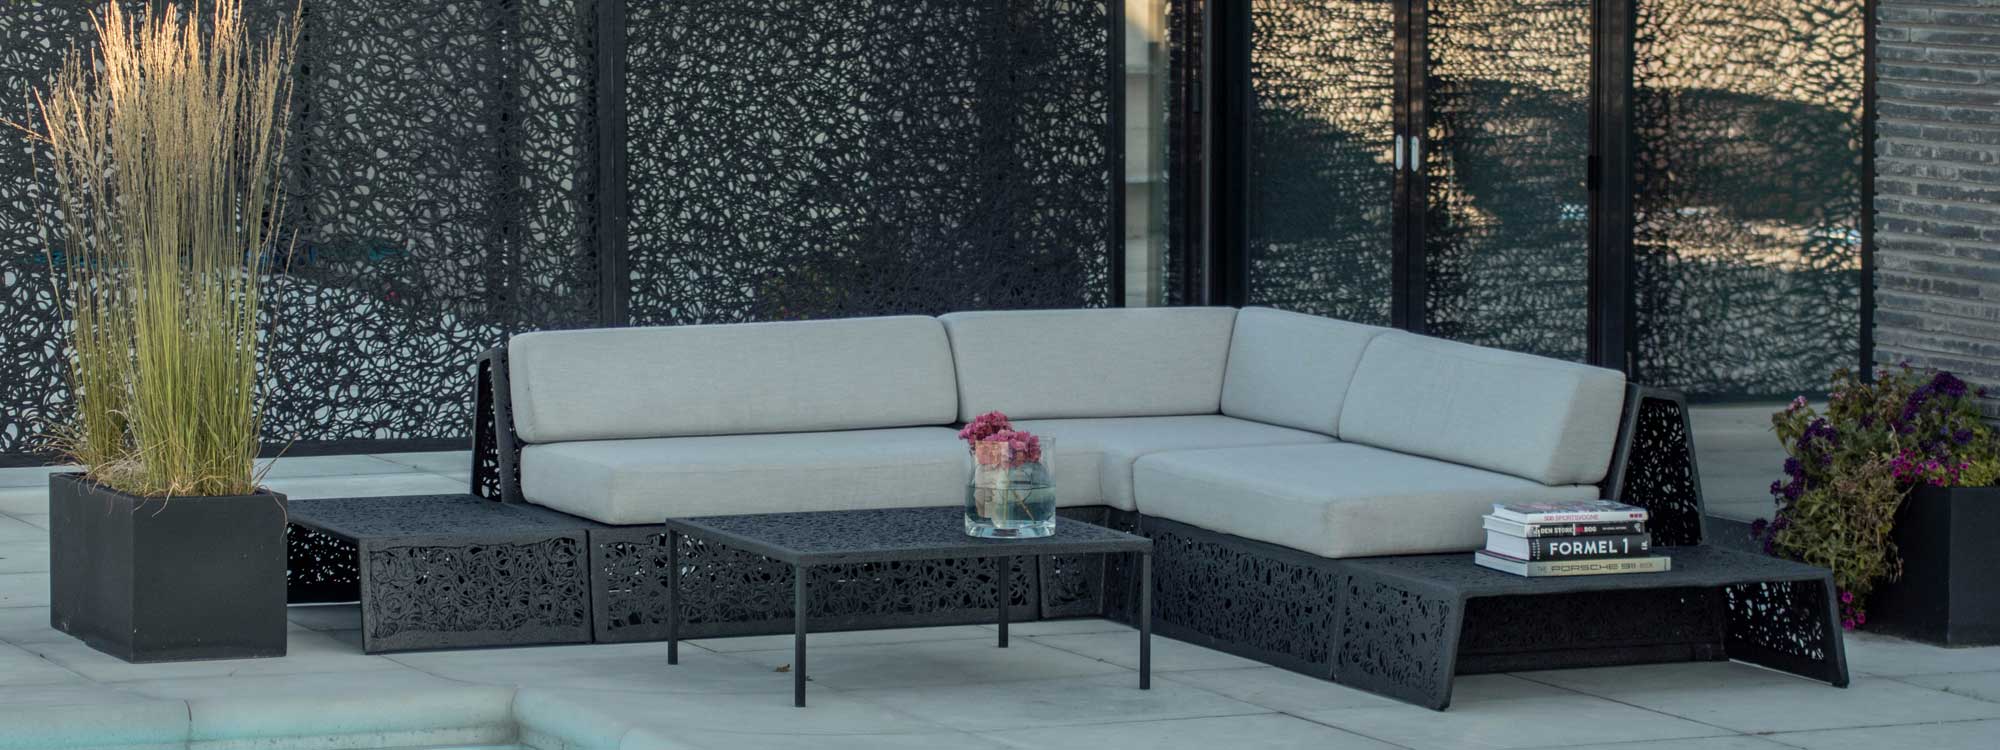 Image of black Bios Lounge furniture with grey cushions, with black lava fence panels in background by Unknown Nordic